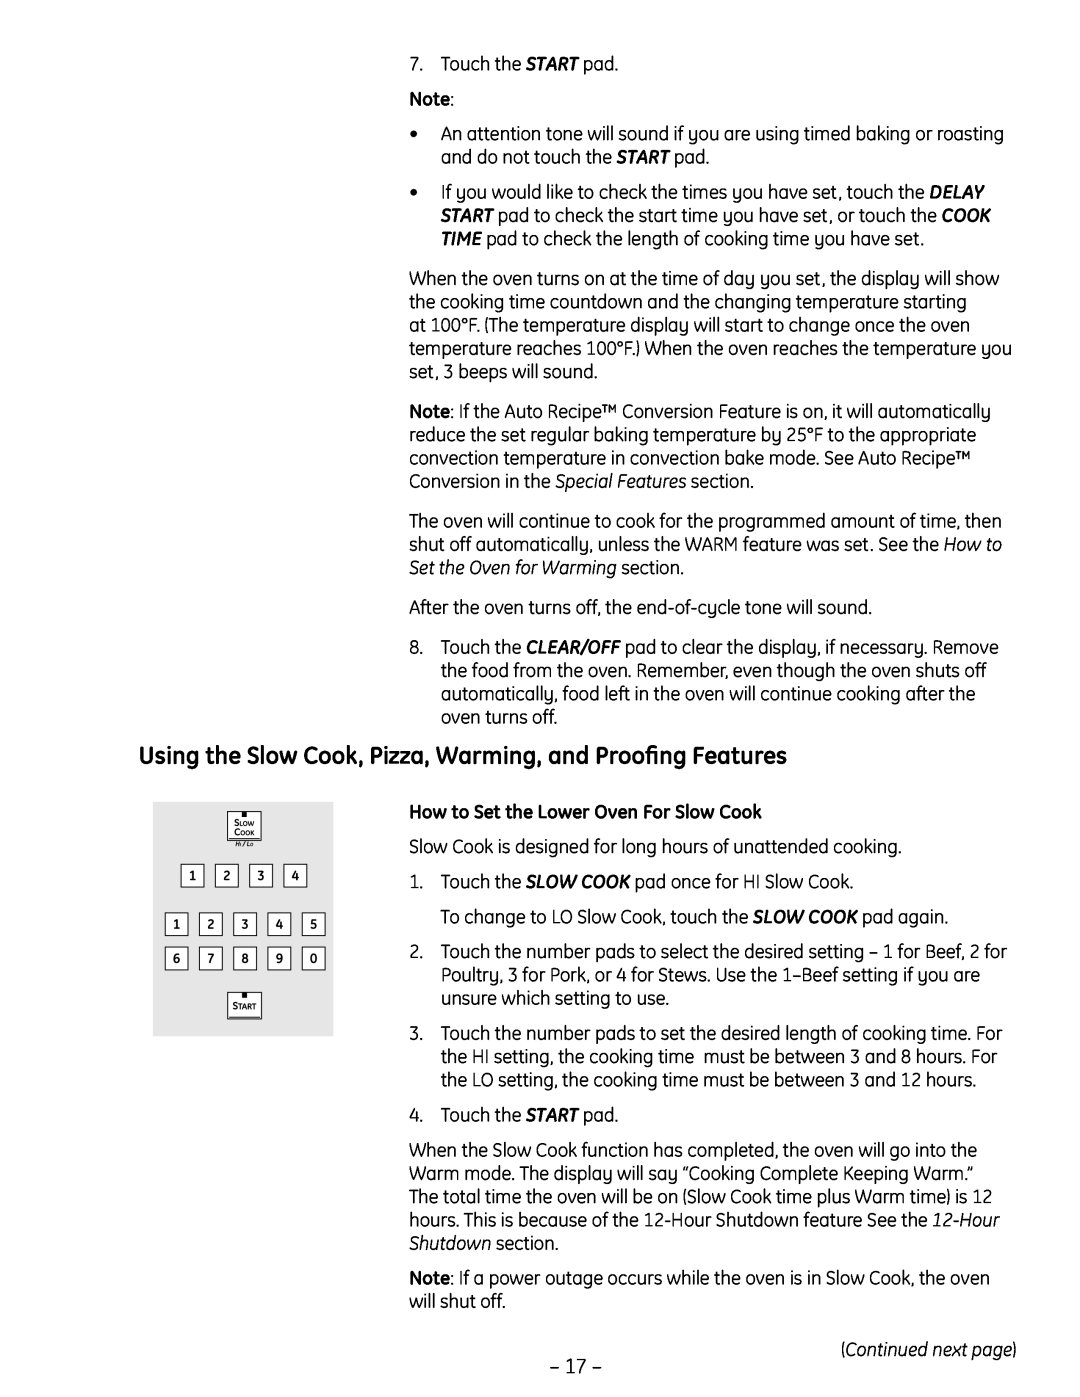 GE PT925 manual Using the Slow Cook, Pizza, Warming, and Prooﬁng Features, How to Set the Lower Oven For Slow Cook 